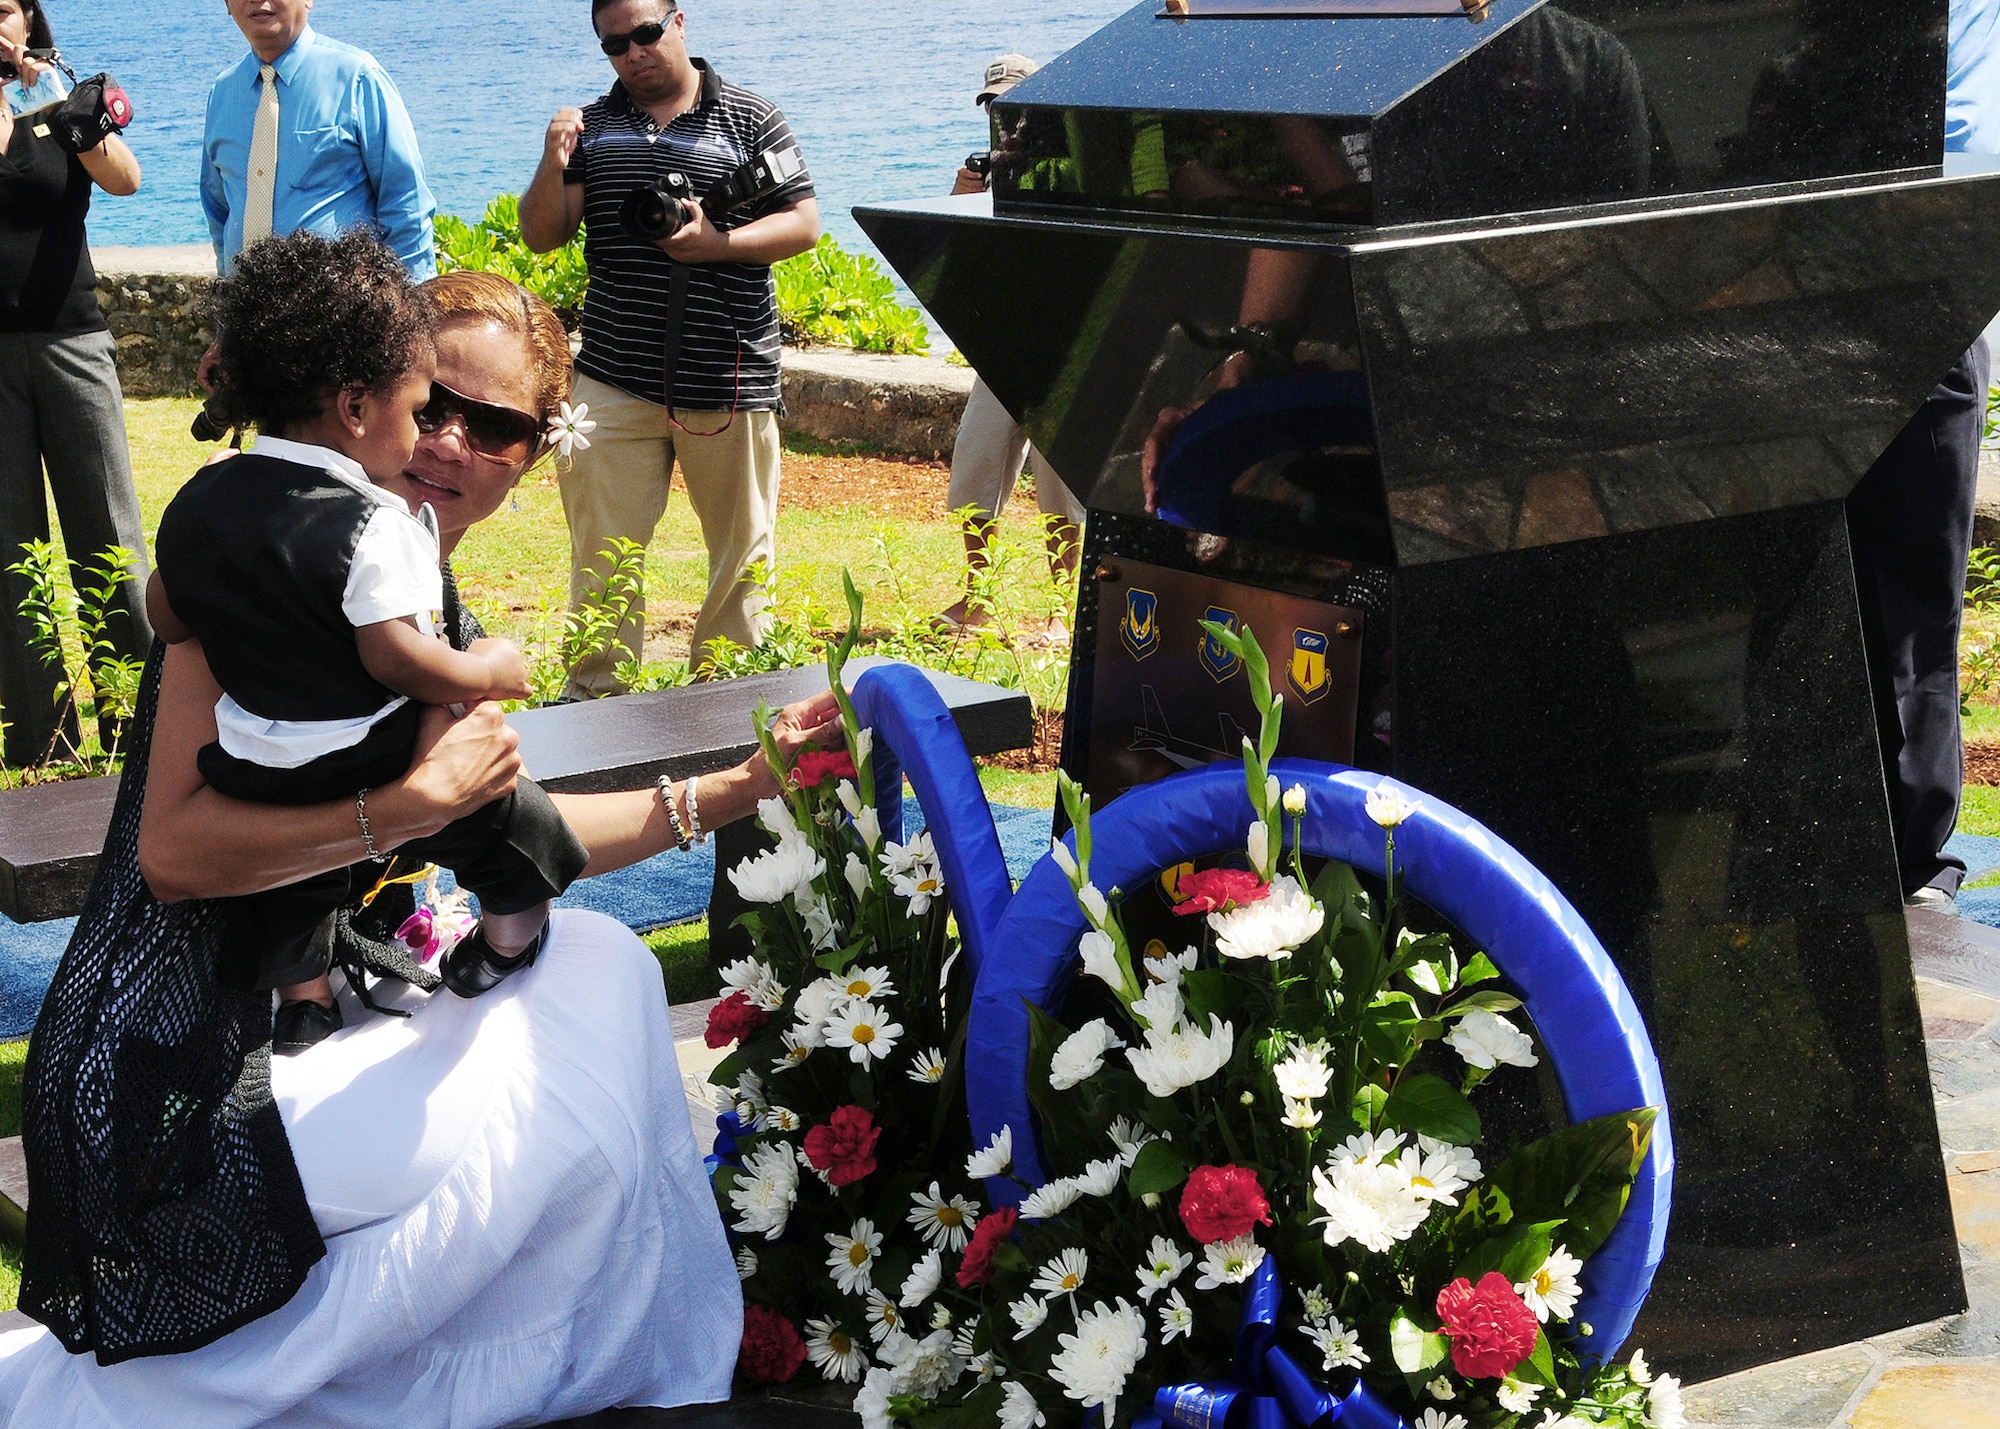 Ursula Martin, wife of Col. George Martin, and their son Guahan Martin lay a wreath at the base of the RAIDR 21 Monument at the Governor's Complex at Adelup Point in Hagatna, Guam, July 20.  They placed the wreath in remembrance of the husband and father they lost July 21, 2008, when a B-52 Stratofortress -- call sign RAIDR 21 -- crashed off the coast of Guam during a mission.  Colonel Martin was one of six crewmembers who perished.  More than 300 family, friends and guests attended the ceremony and monument unveiling.  (U.S. Air Force photo/Senior Airman Nichelle Anderson)